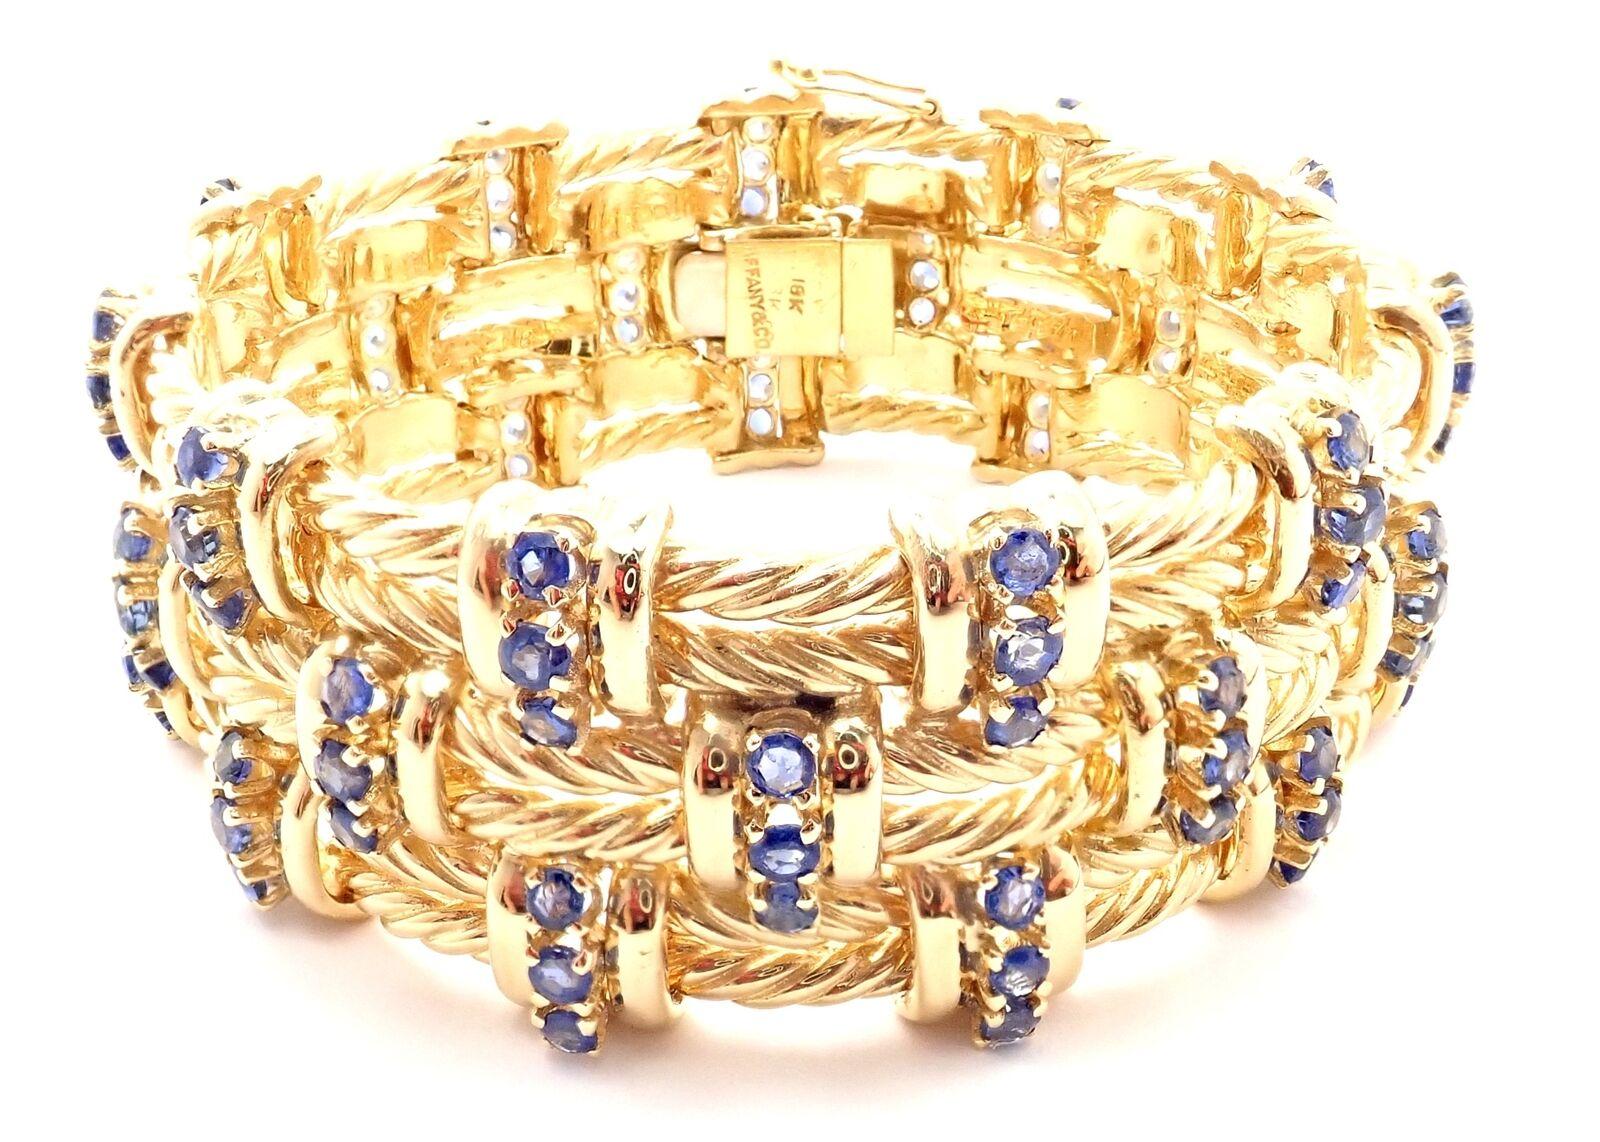 18k Yellow Gold Sapphire Twisted Rope Link Bracelet by Tiffany & Co.
With 99 round sapphires weight approximately 9.24ct
This bracelet comes with Retail Replacement Valuation from Tiffany store in NYC.
Details:
Weight: 103.1 grams
Length: 6